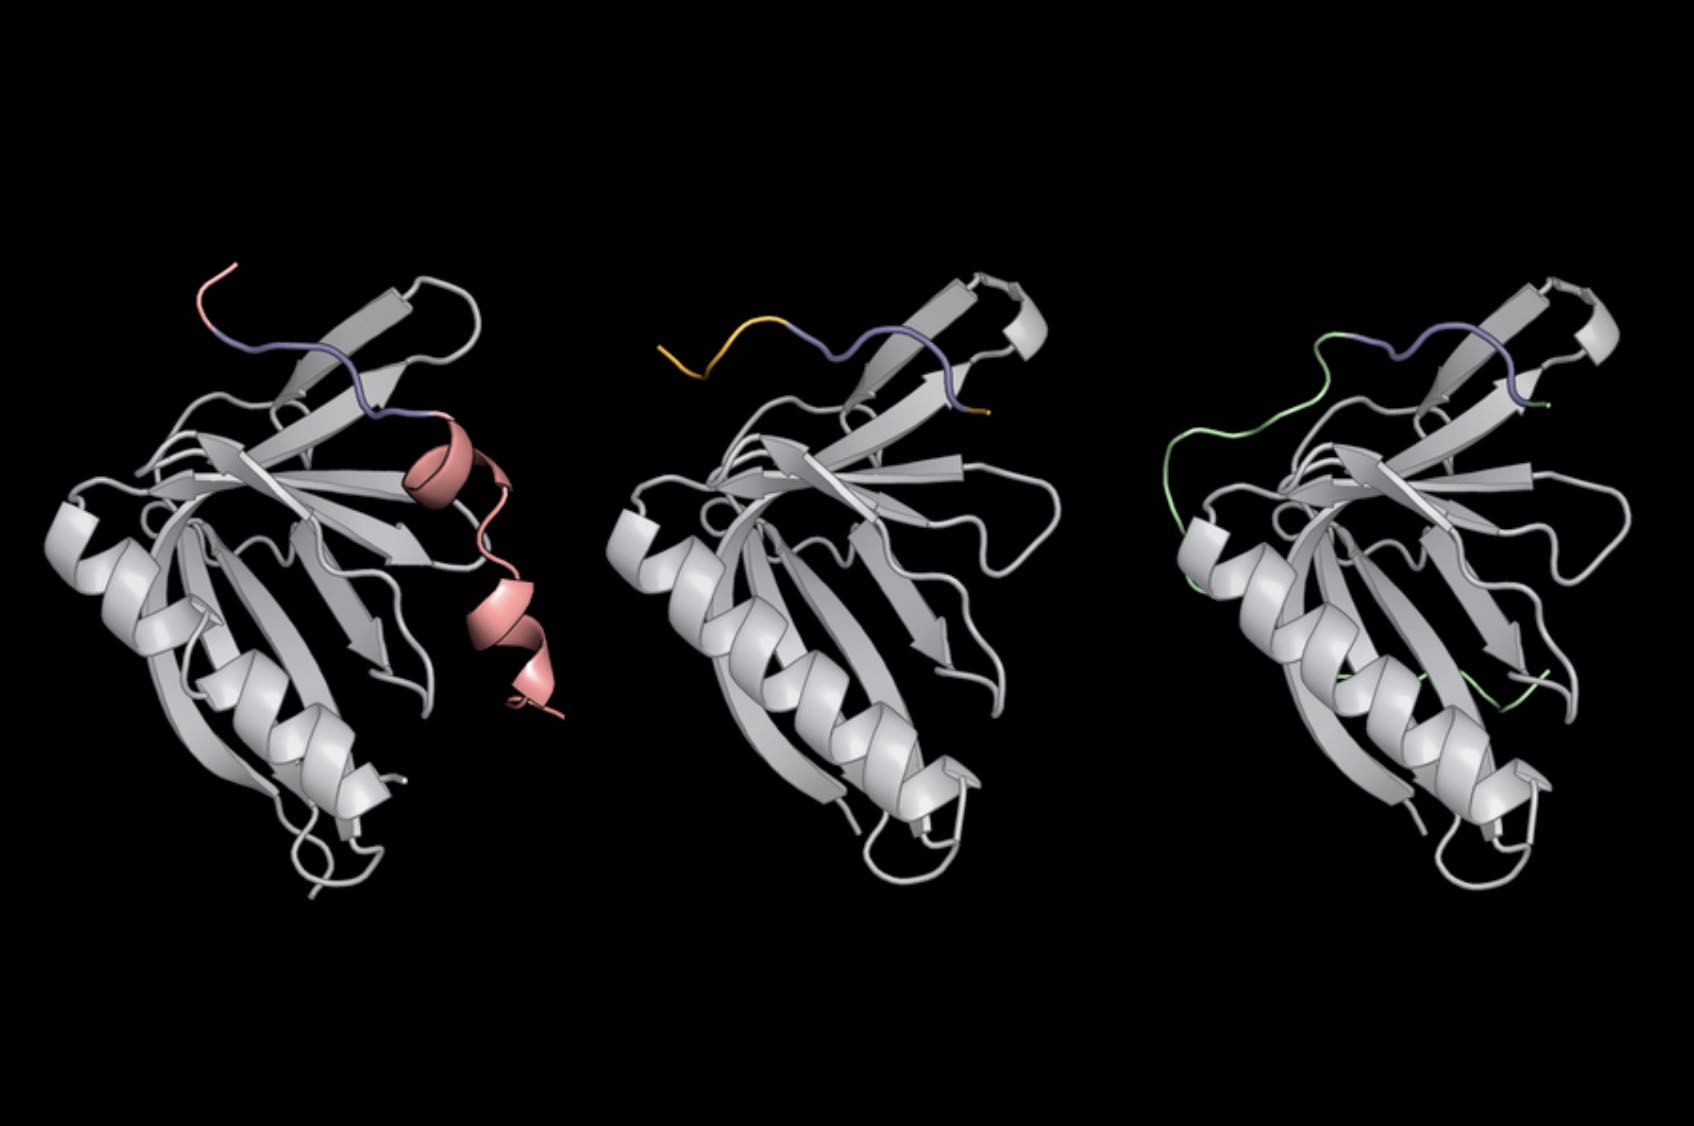 Probing how proteins pair up inside cells